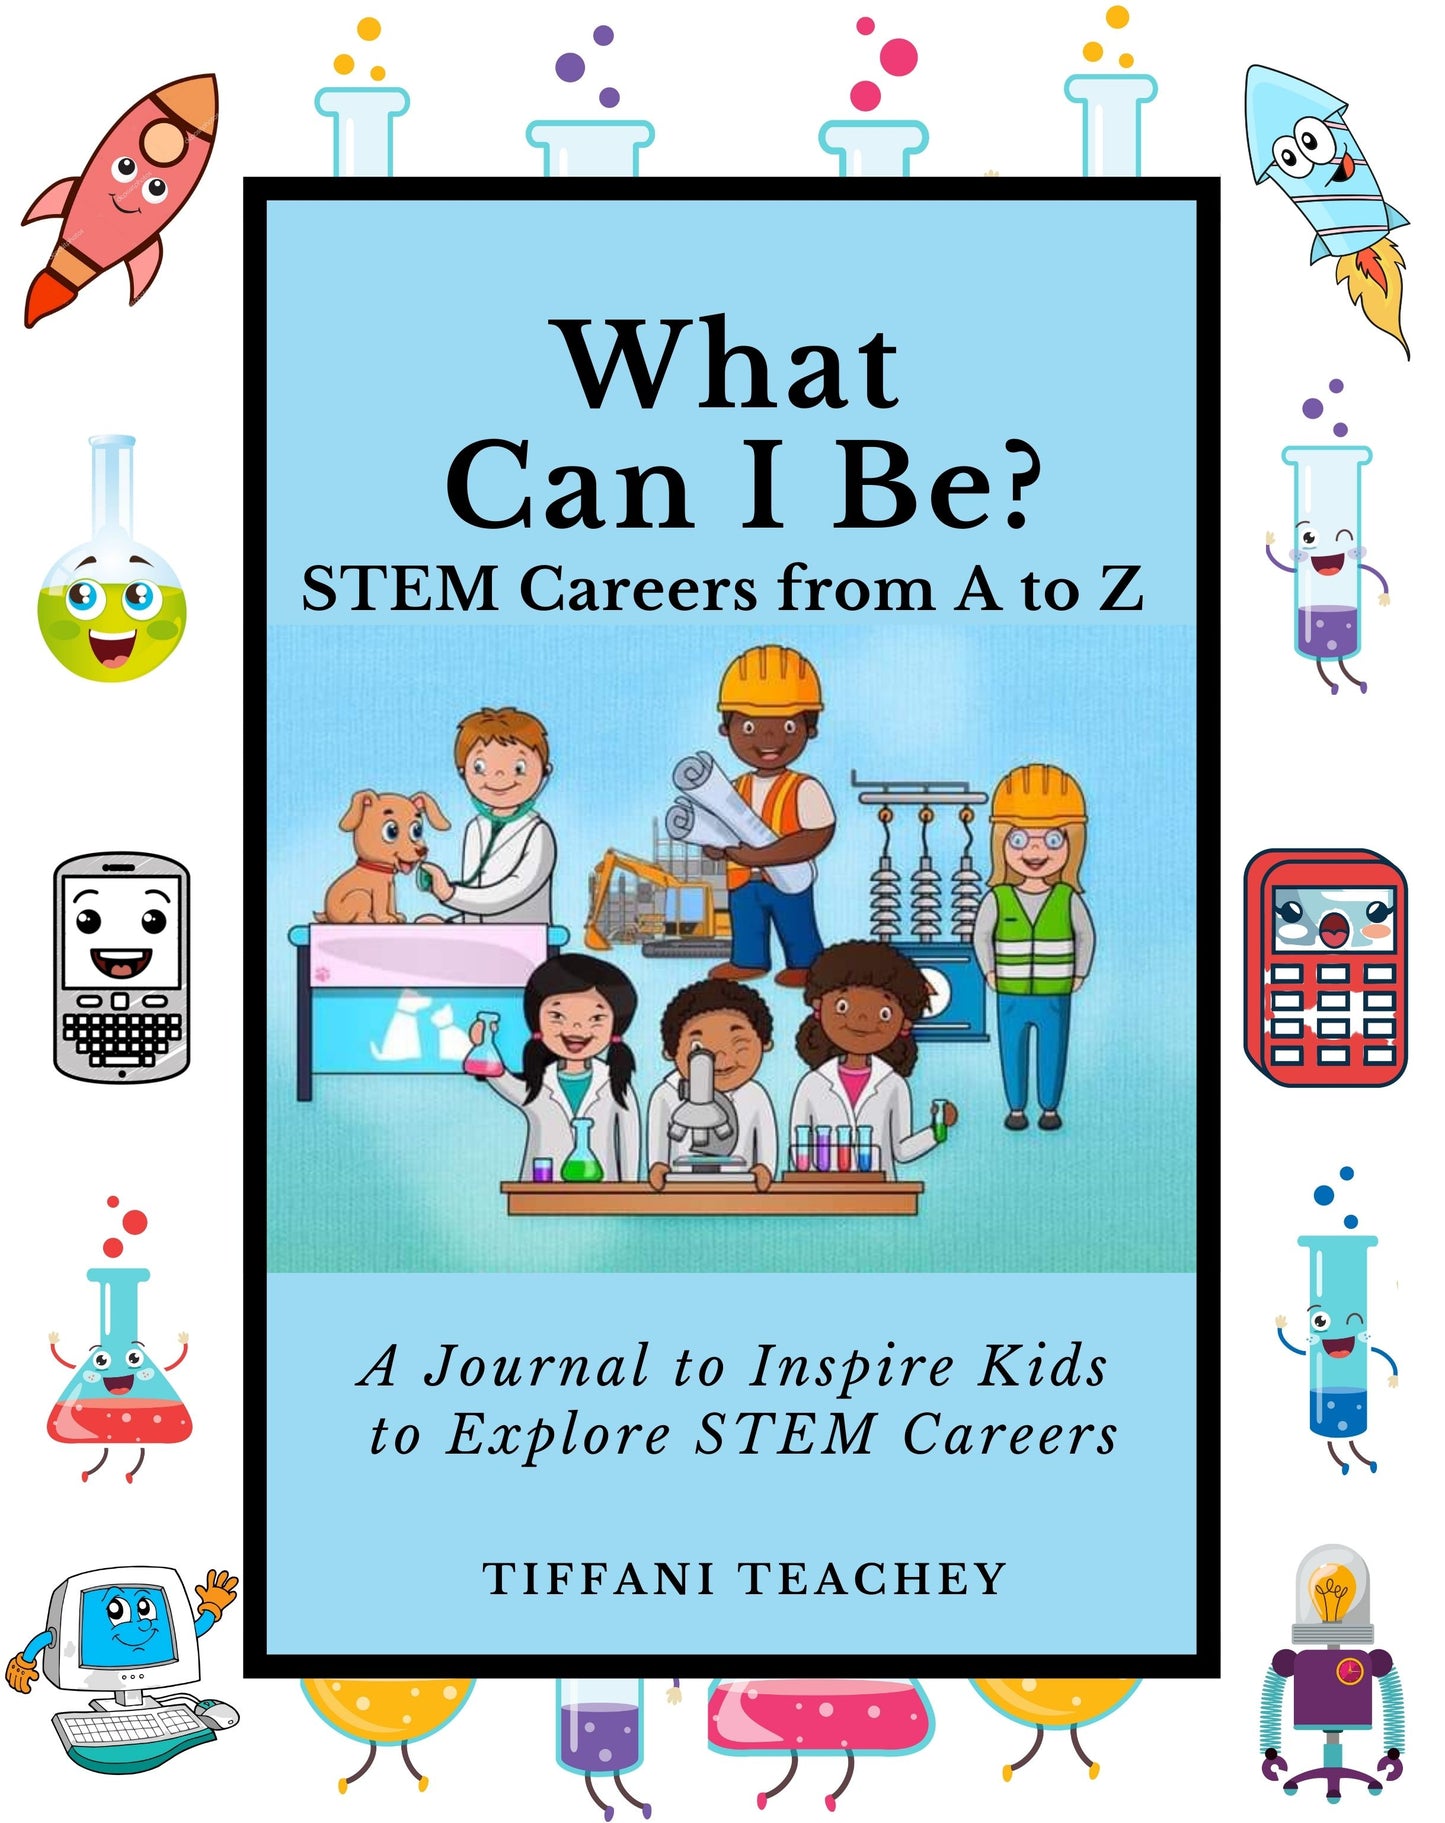 What Can I Be? STEM Careers from A to Z: A Journal to Inspire Kids to Explore STEM Careers